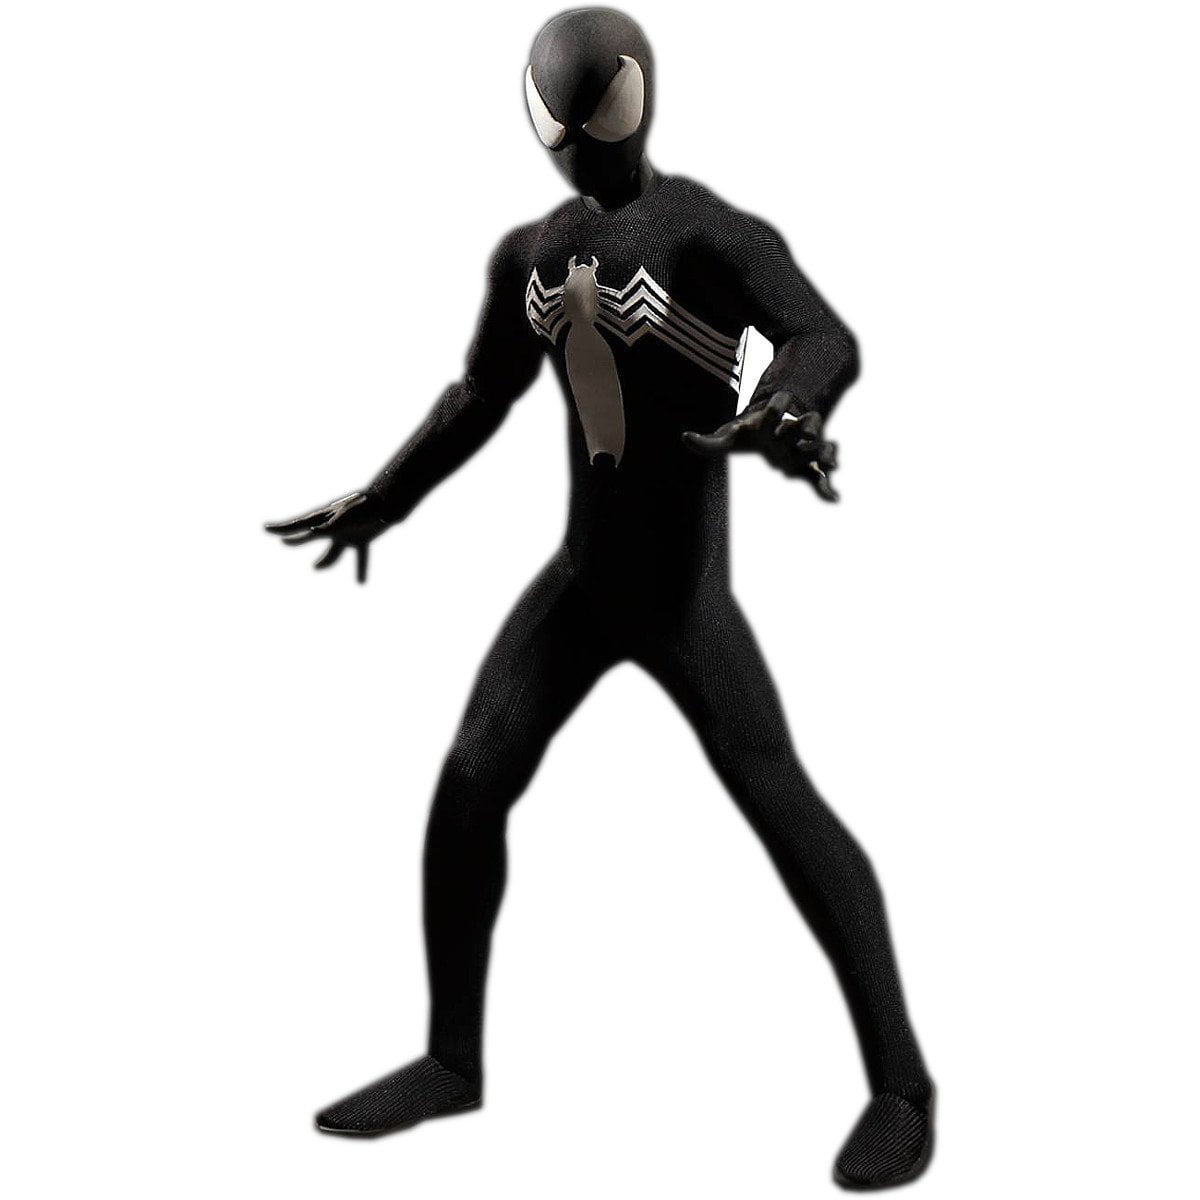 Spider-Man Black Suit One:12 Collective Previews Exclusive 